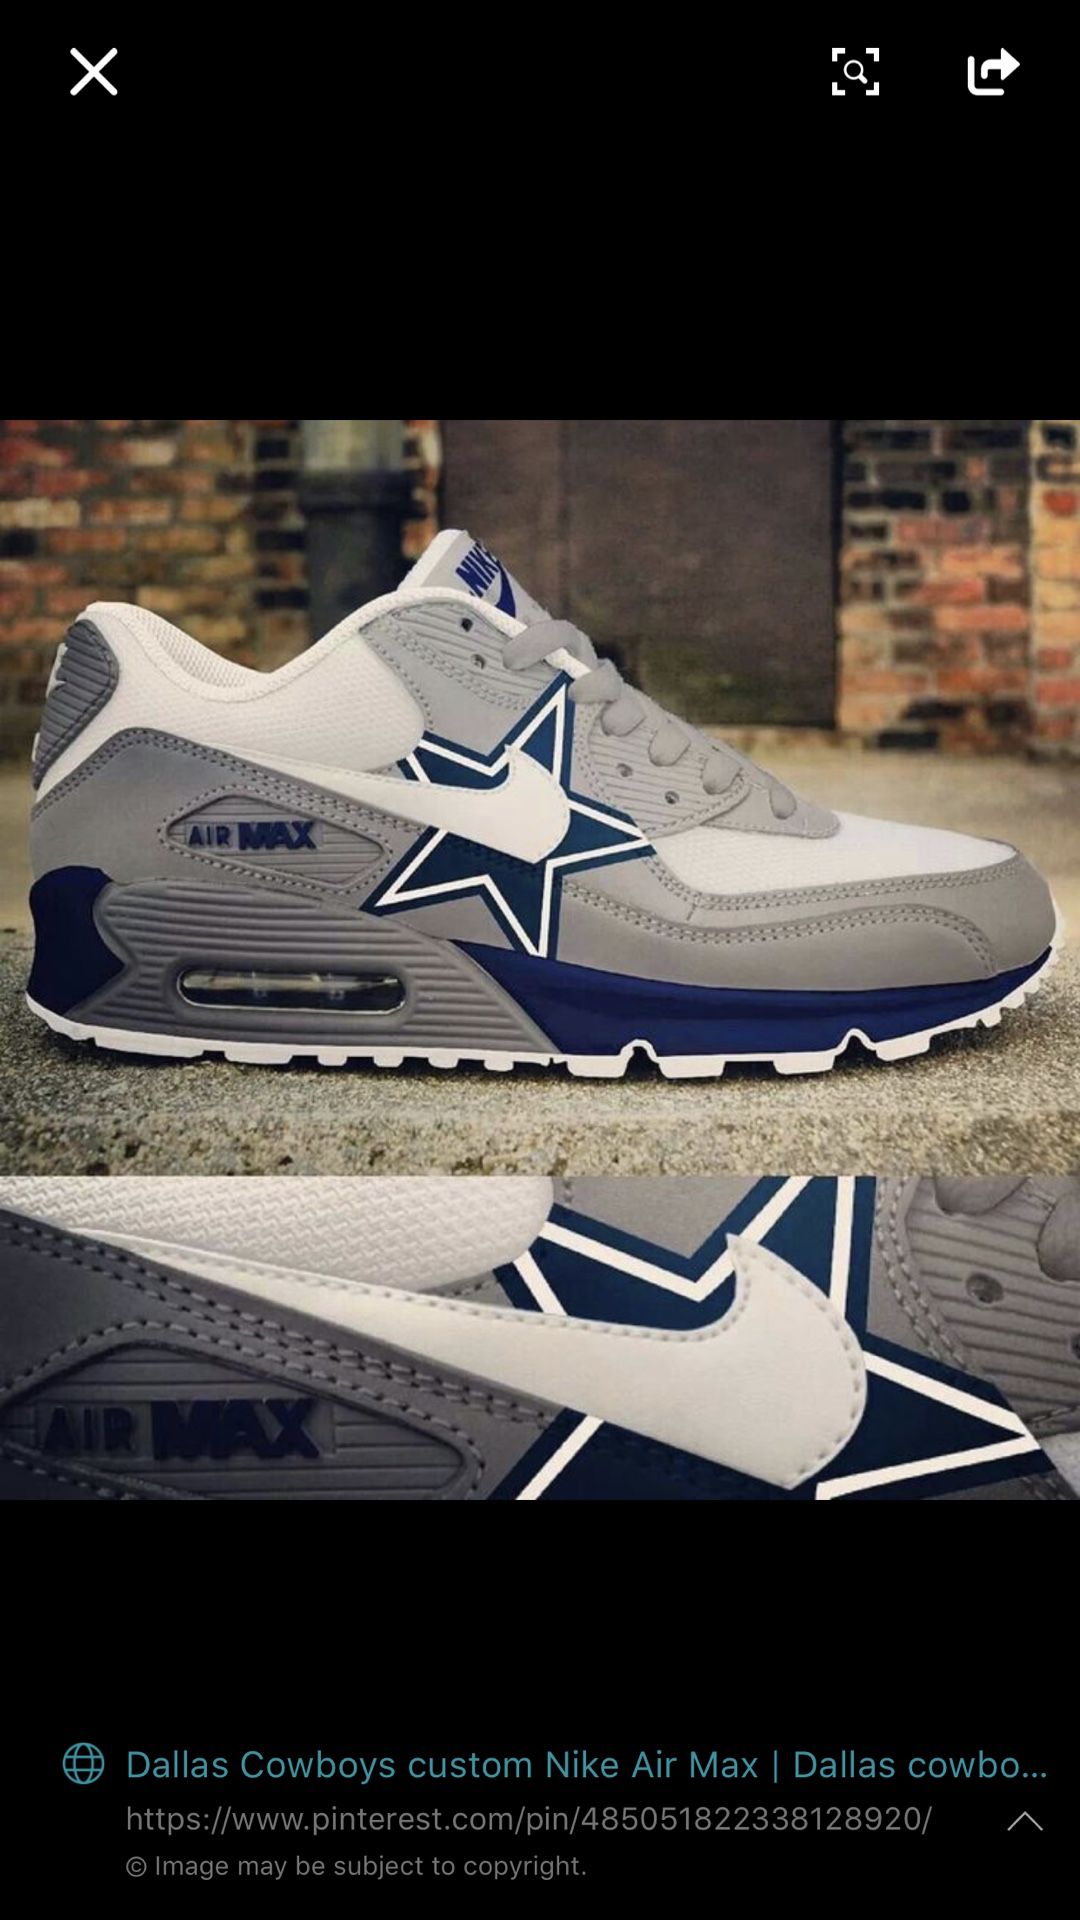 Dallas cowboys air max! 8.5 for Sale in Duncanville, TX - OfferUp